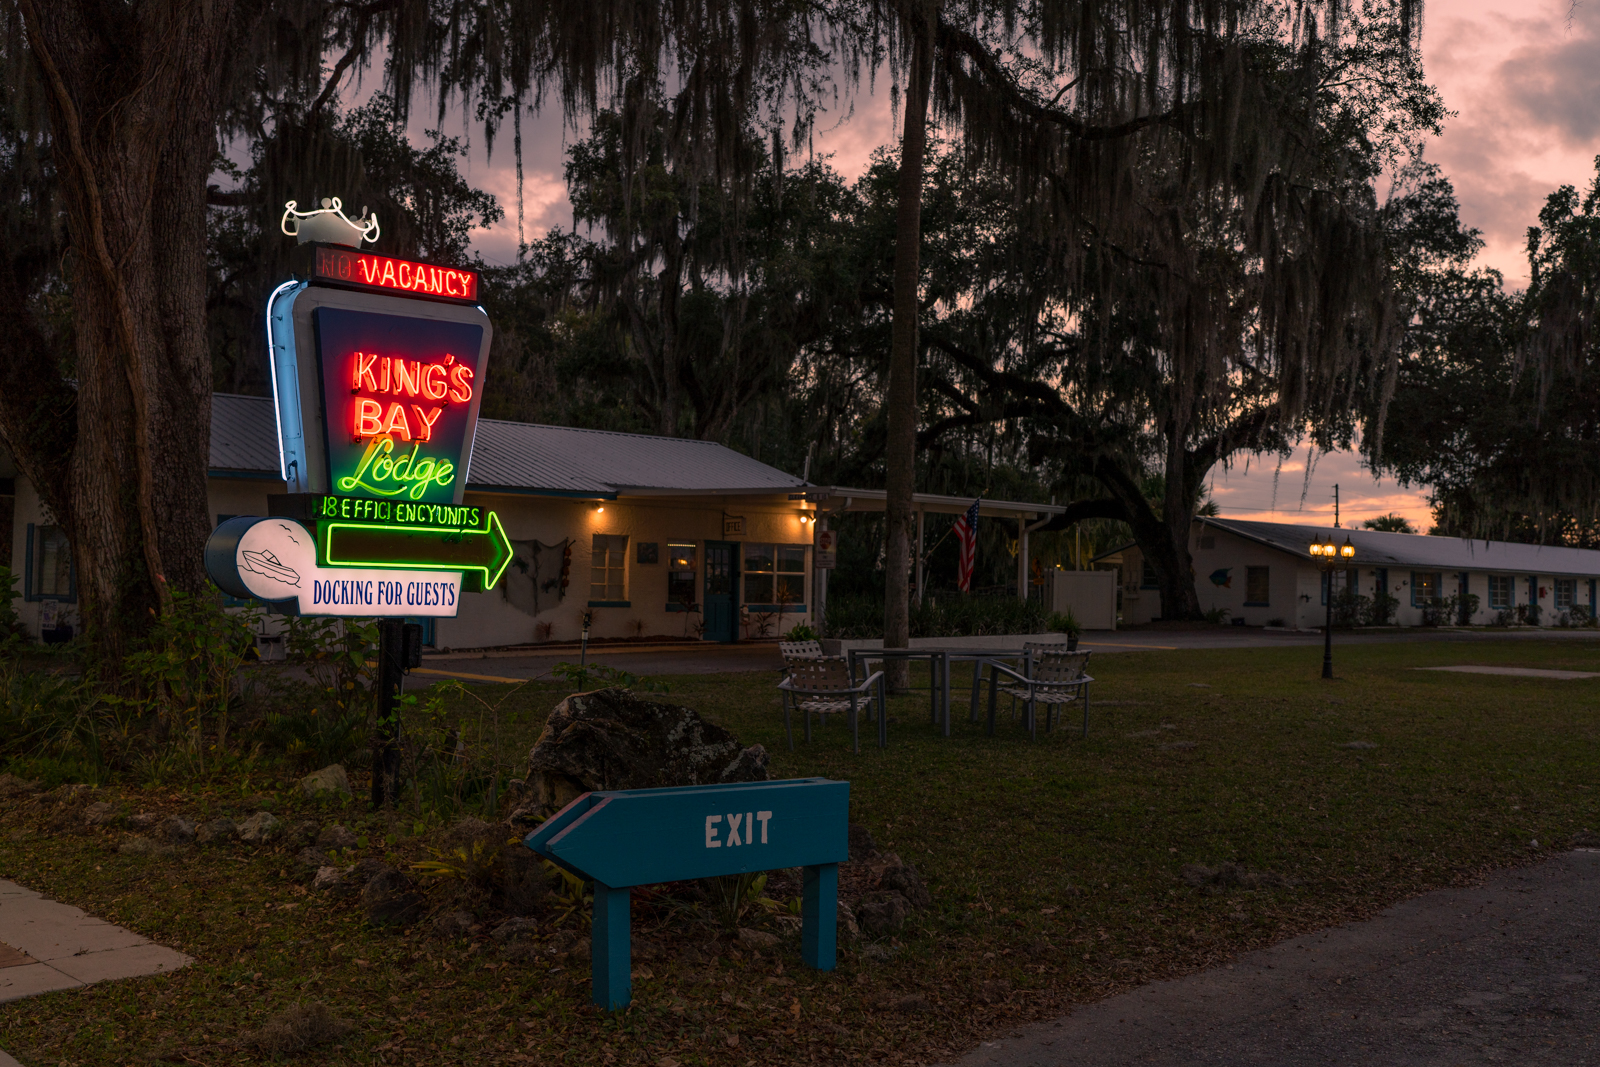 The King's Bay Lodge's iconic neon sign is lit up advertising vacancy and 18 efficiency units and docking for guests. Most of the rest of the photo is dark as it is night. There are a few porch lights on in the background, dimly light up the lodge. 